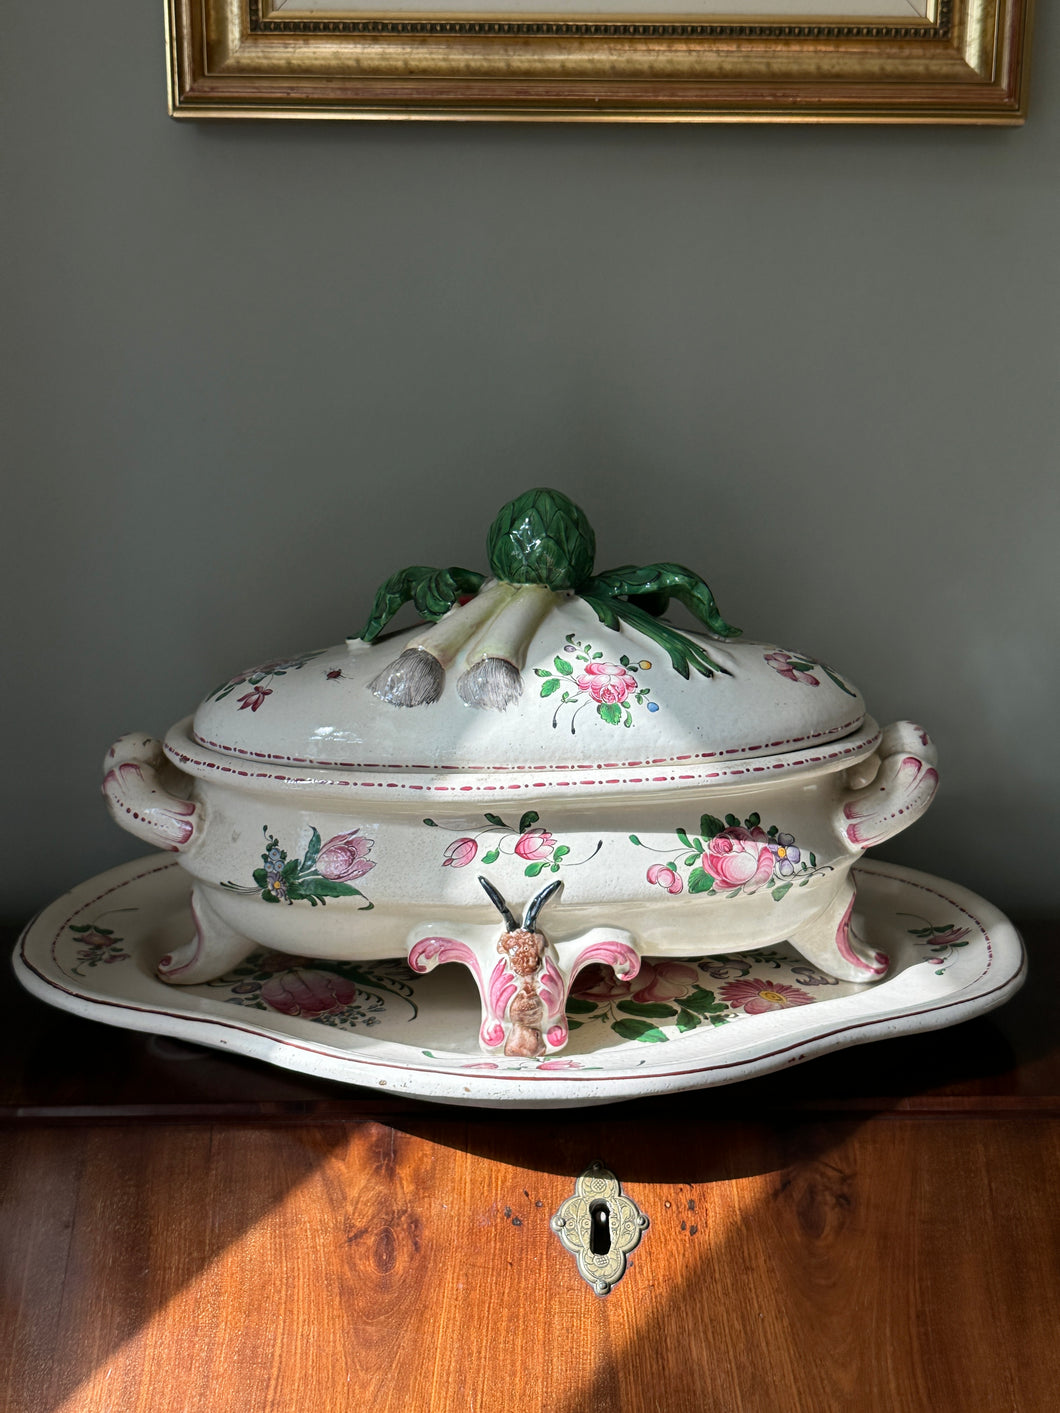  Antique French Hand-Painted Faience Soup Tureen